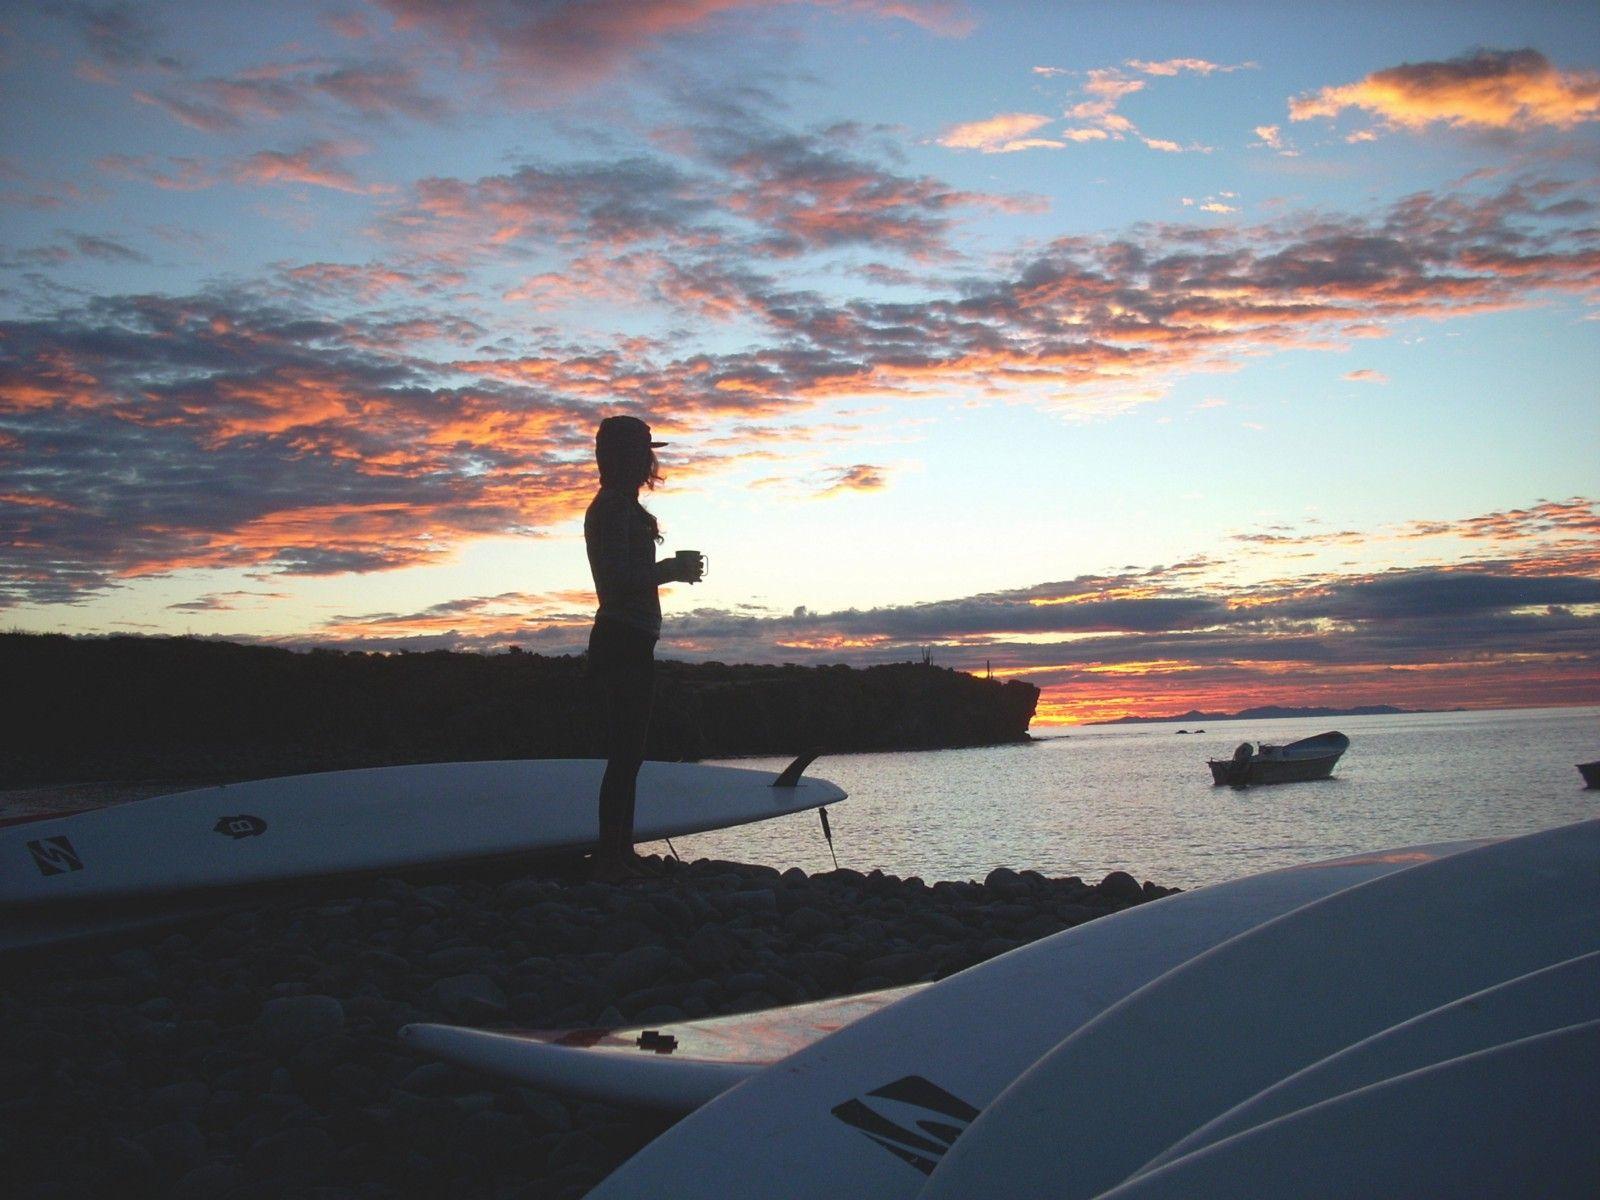 Paddle Boarding in the Sea of Cortez: Trading my iPhone for the Sun